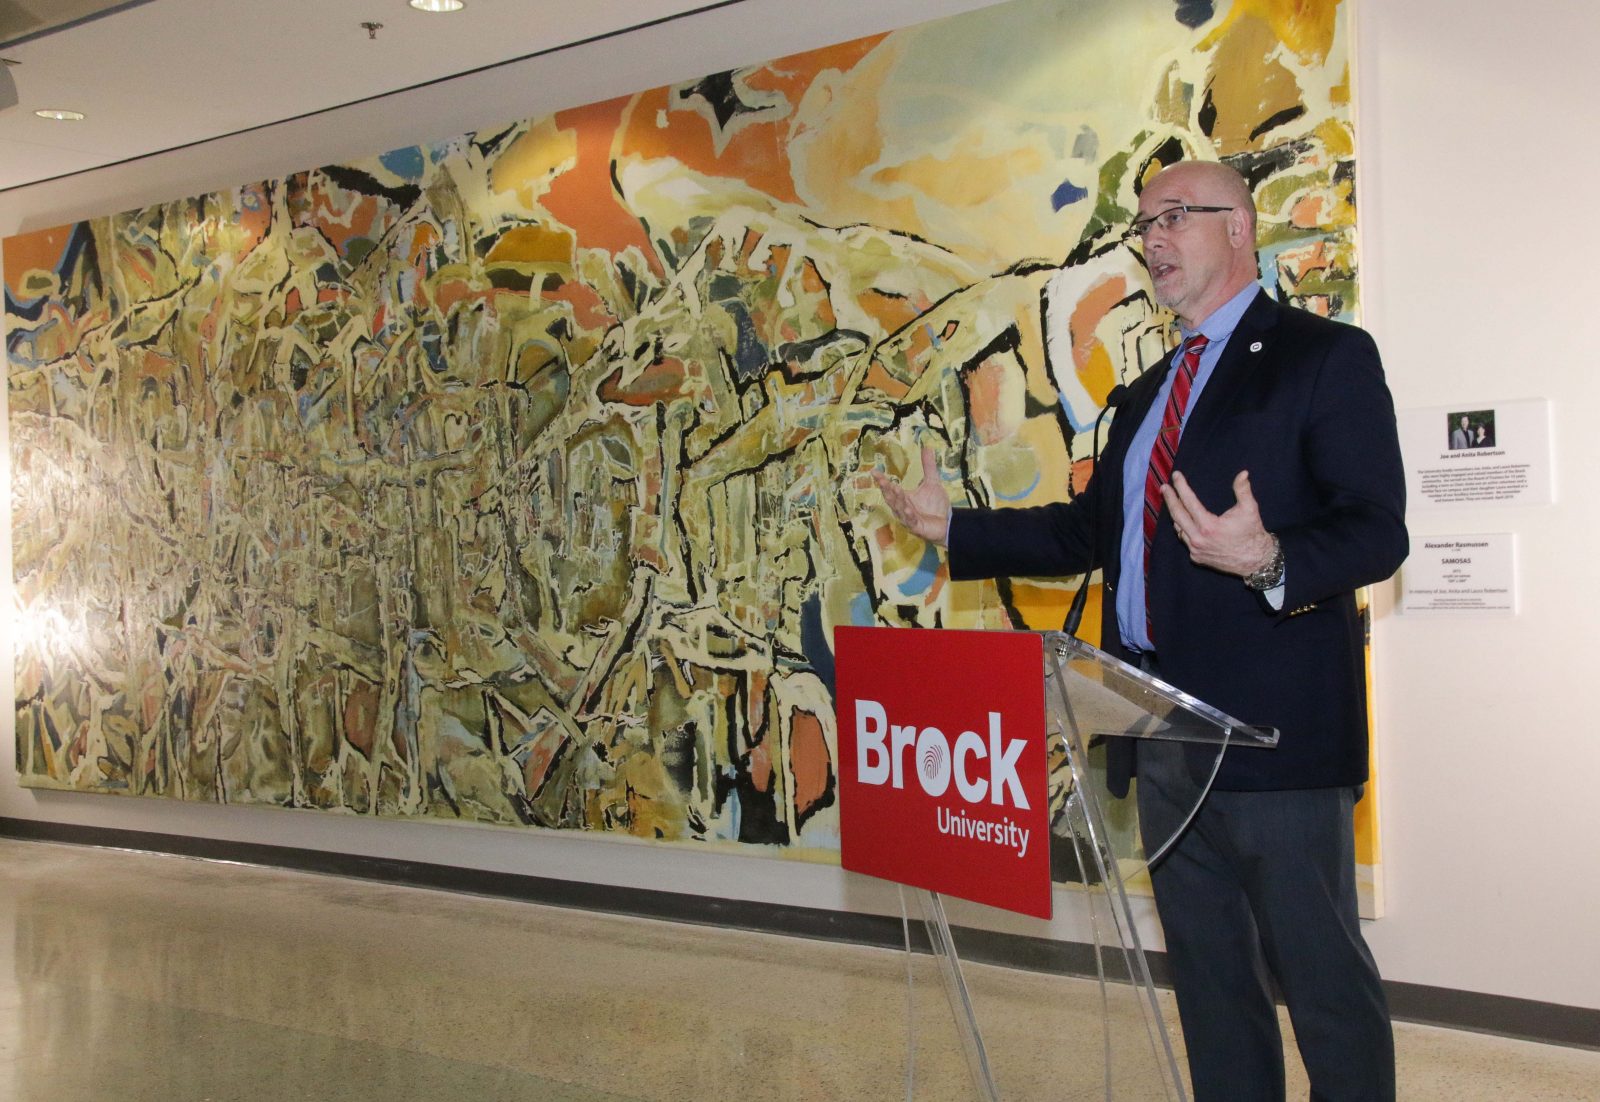 Robertsons leave $1M to Brock to sustain new scholarships – The Brock News